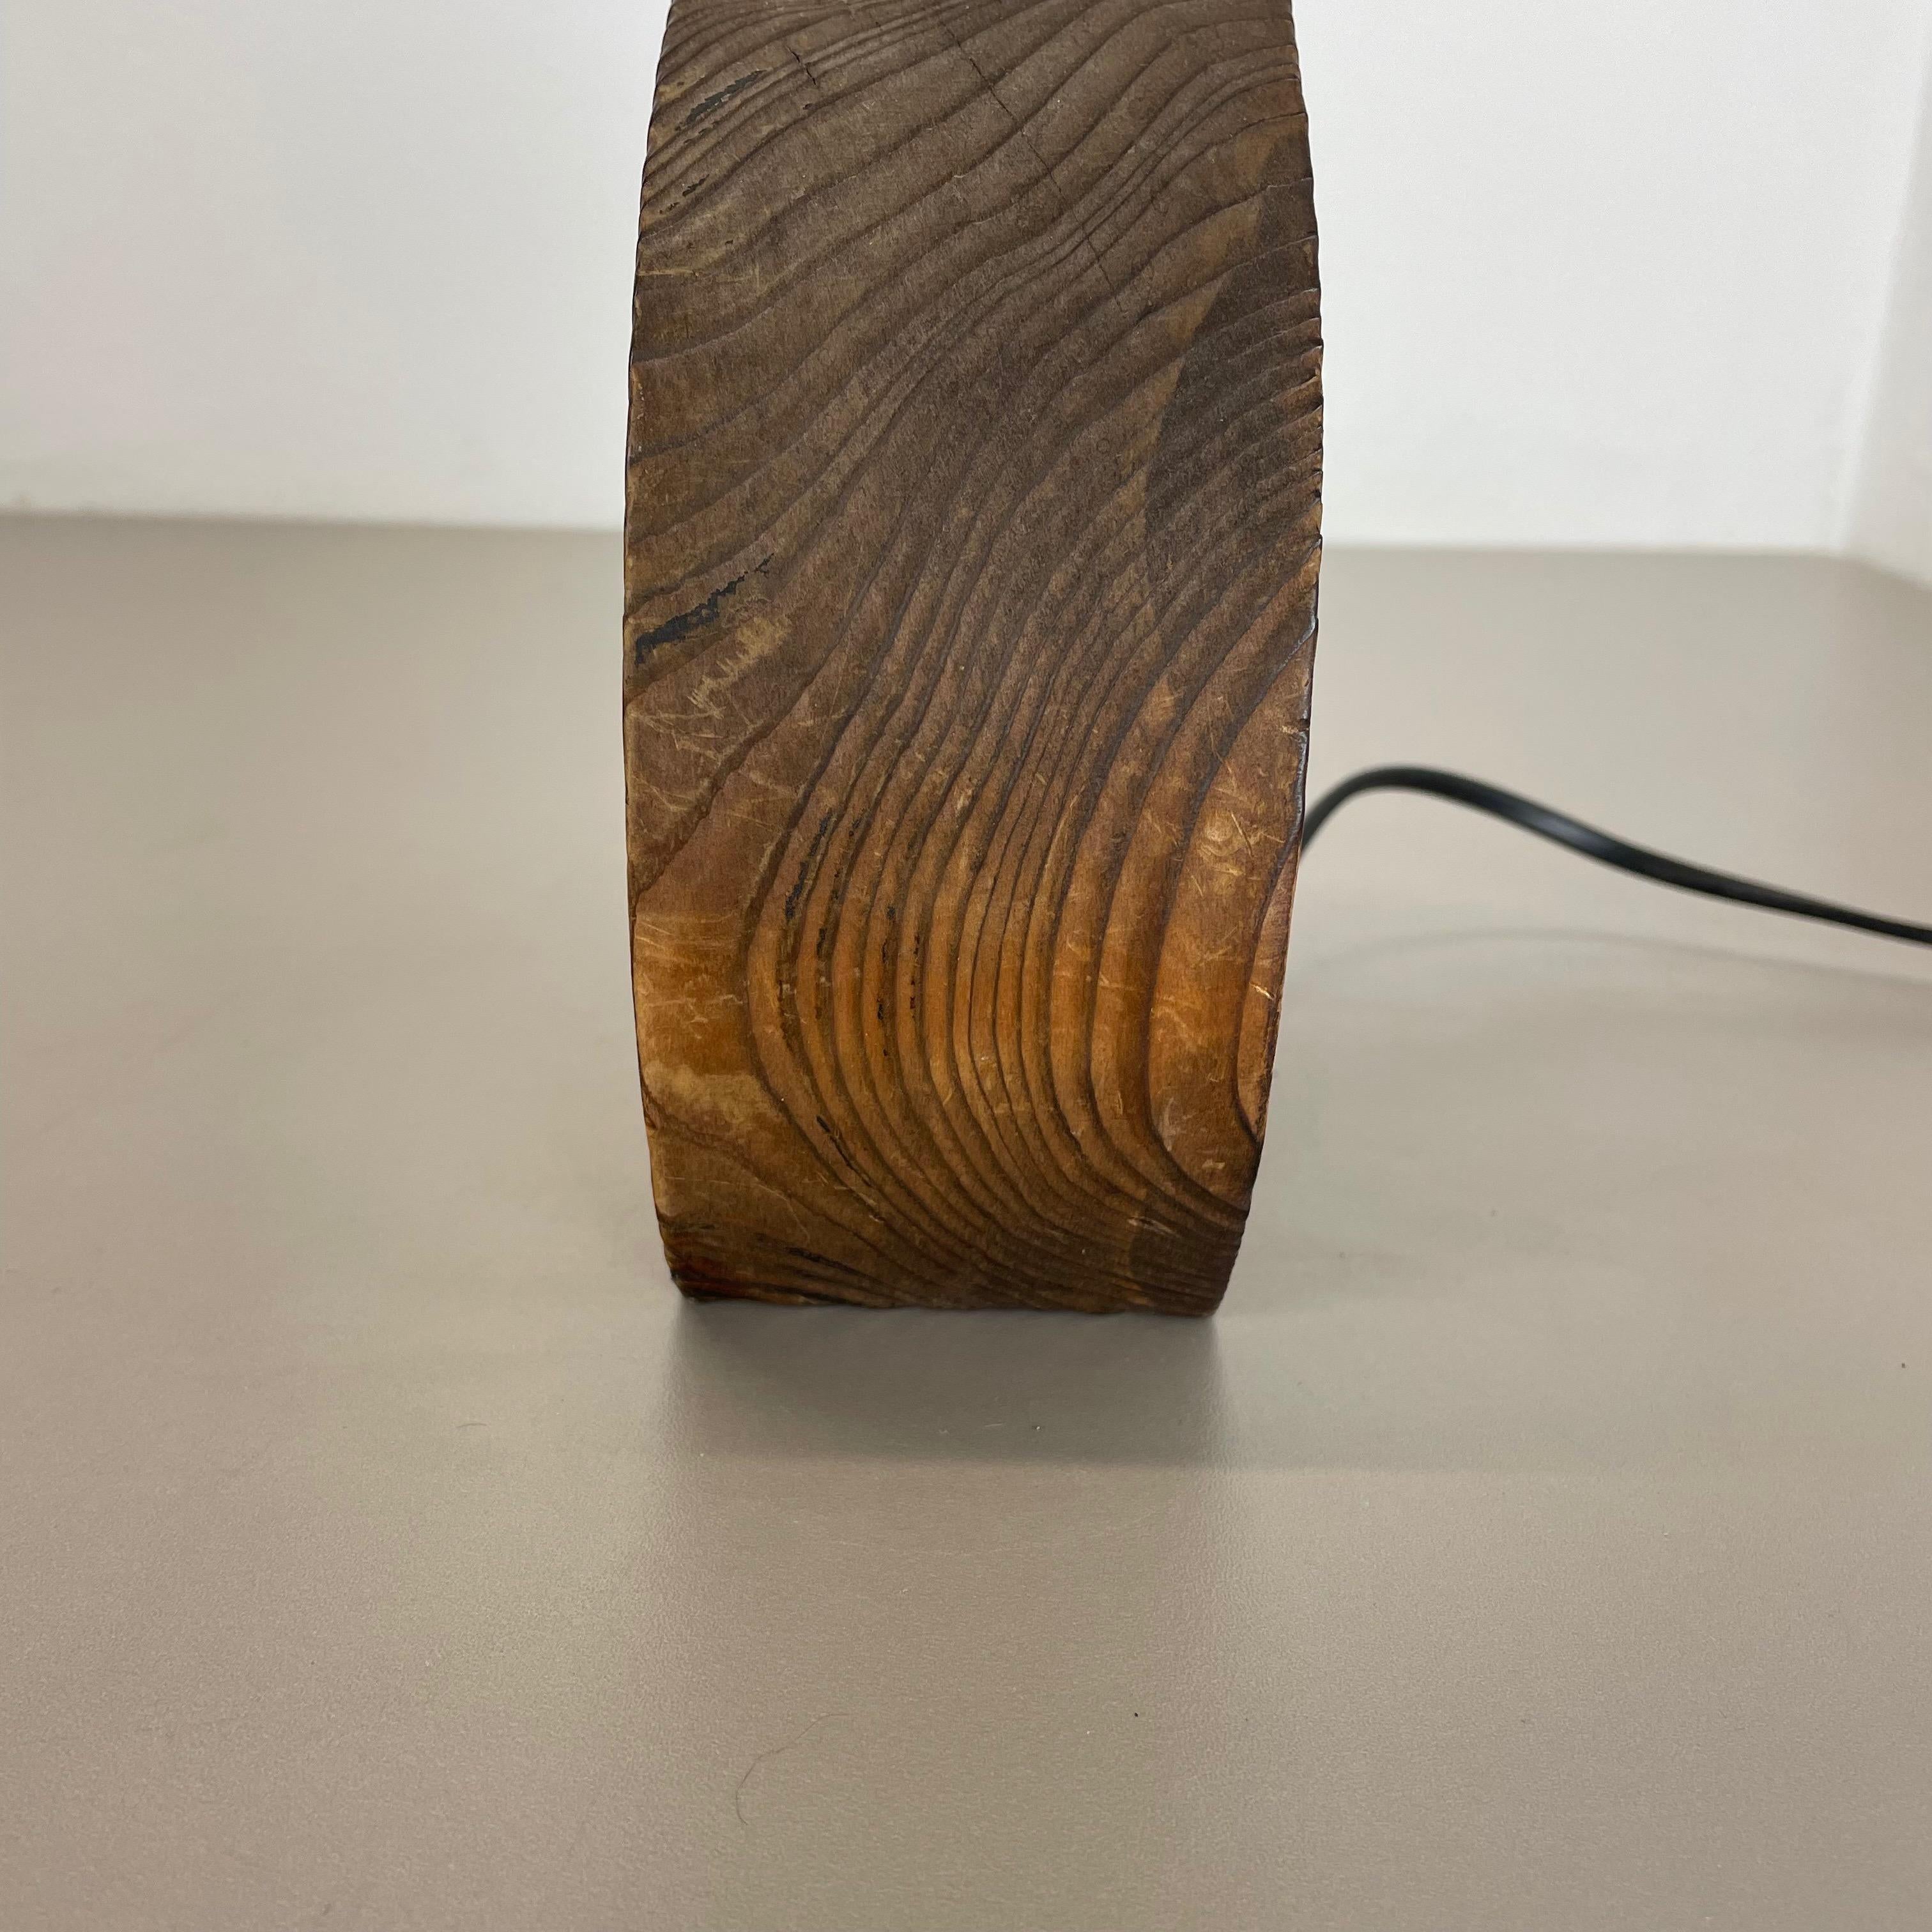 Organic Sculptural Wooden Table Light Made Temde Lights, Germany, 1970s For Sale 11